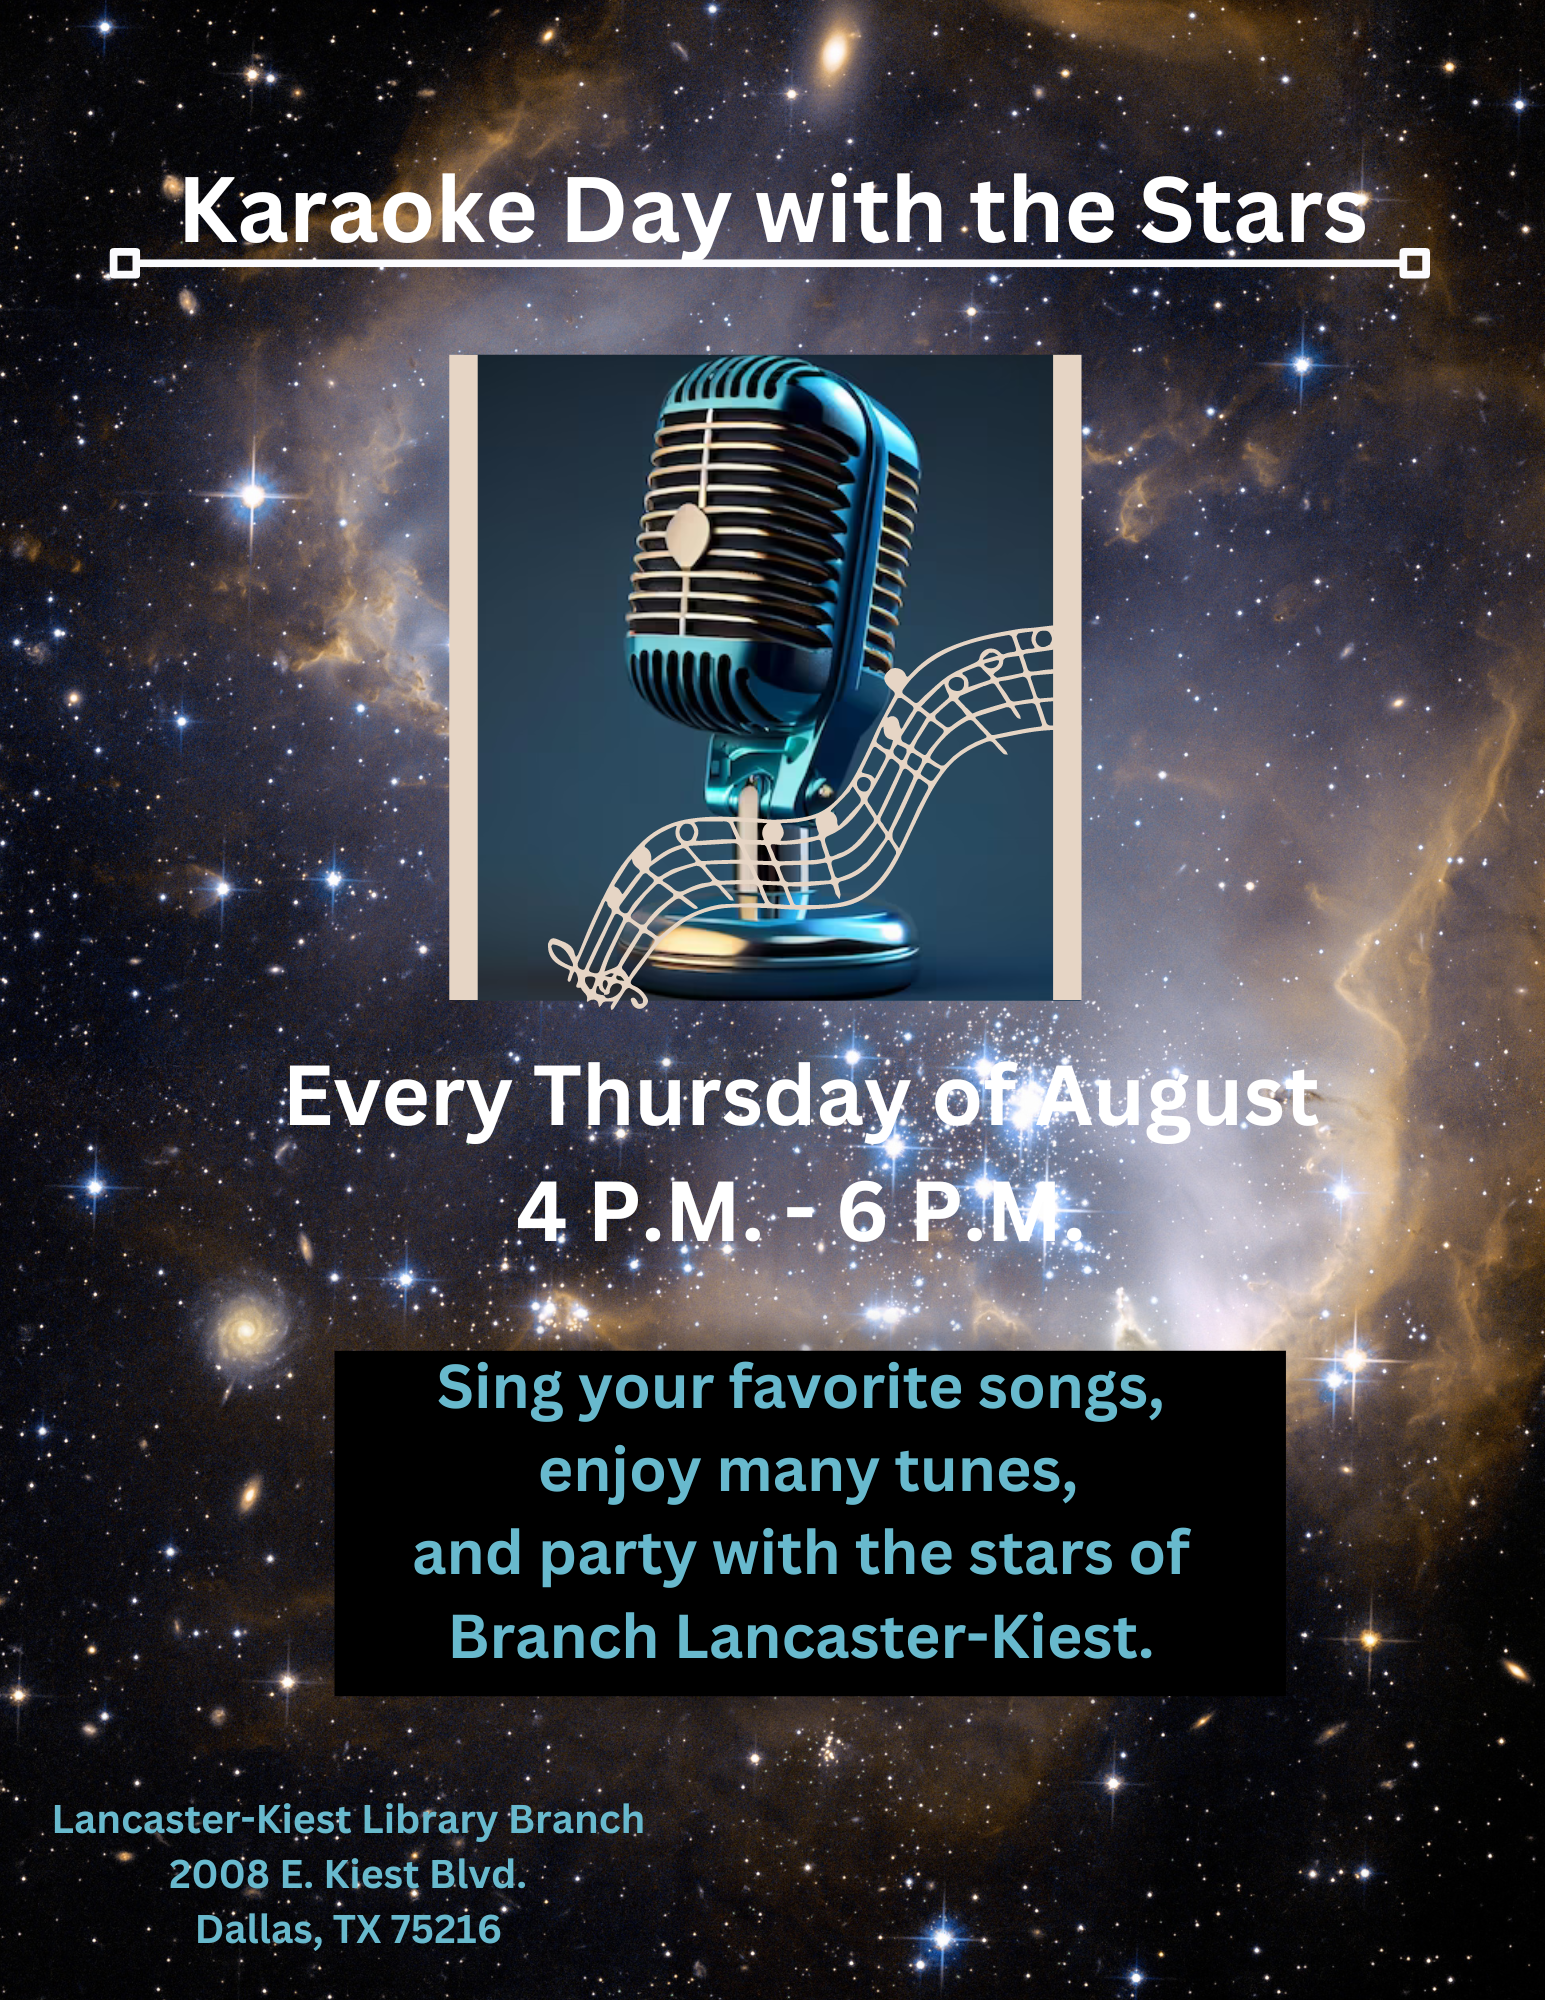 Party and sing along with the stars of Lancaster Kiest Branch Library. 